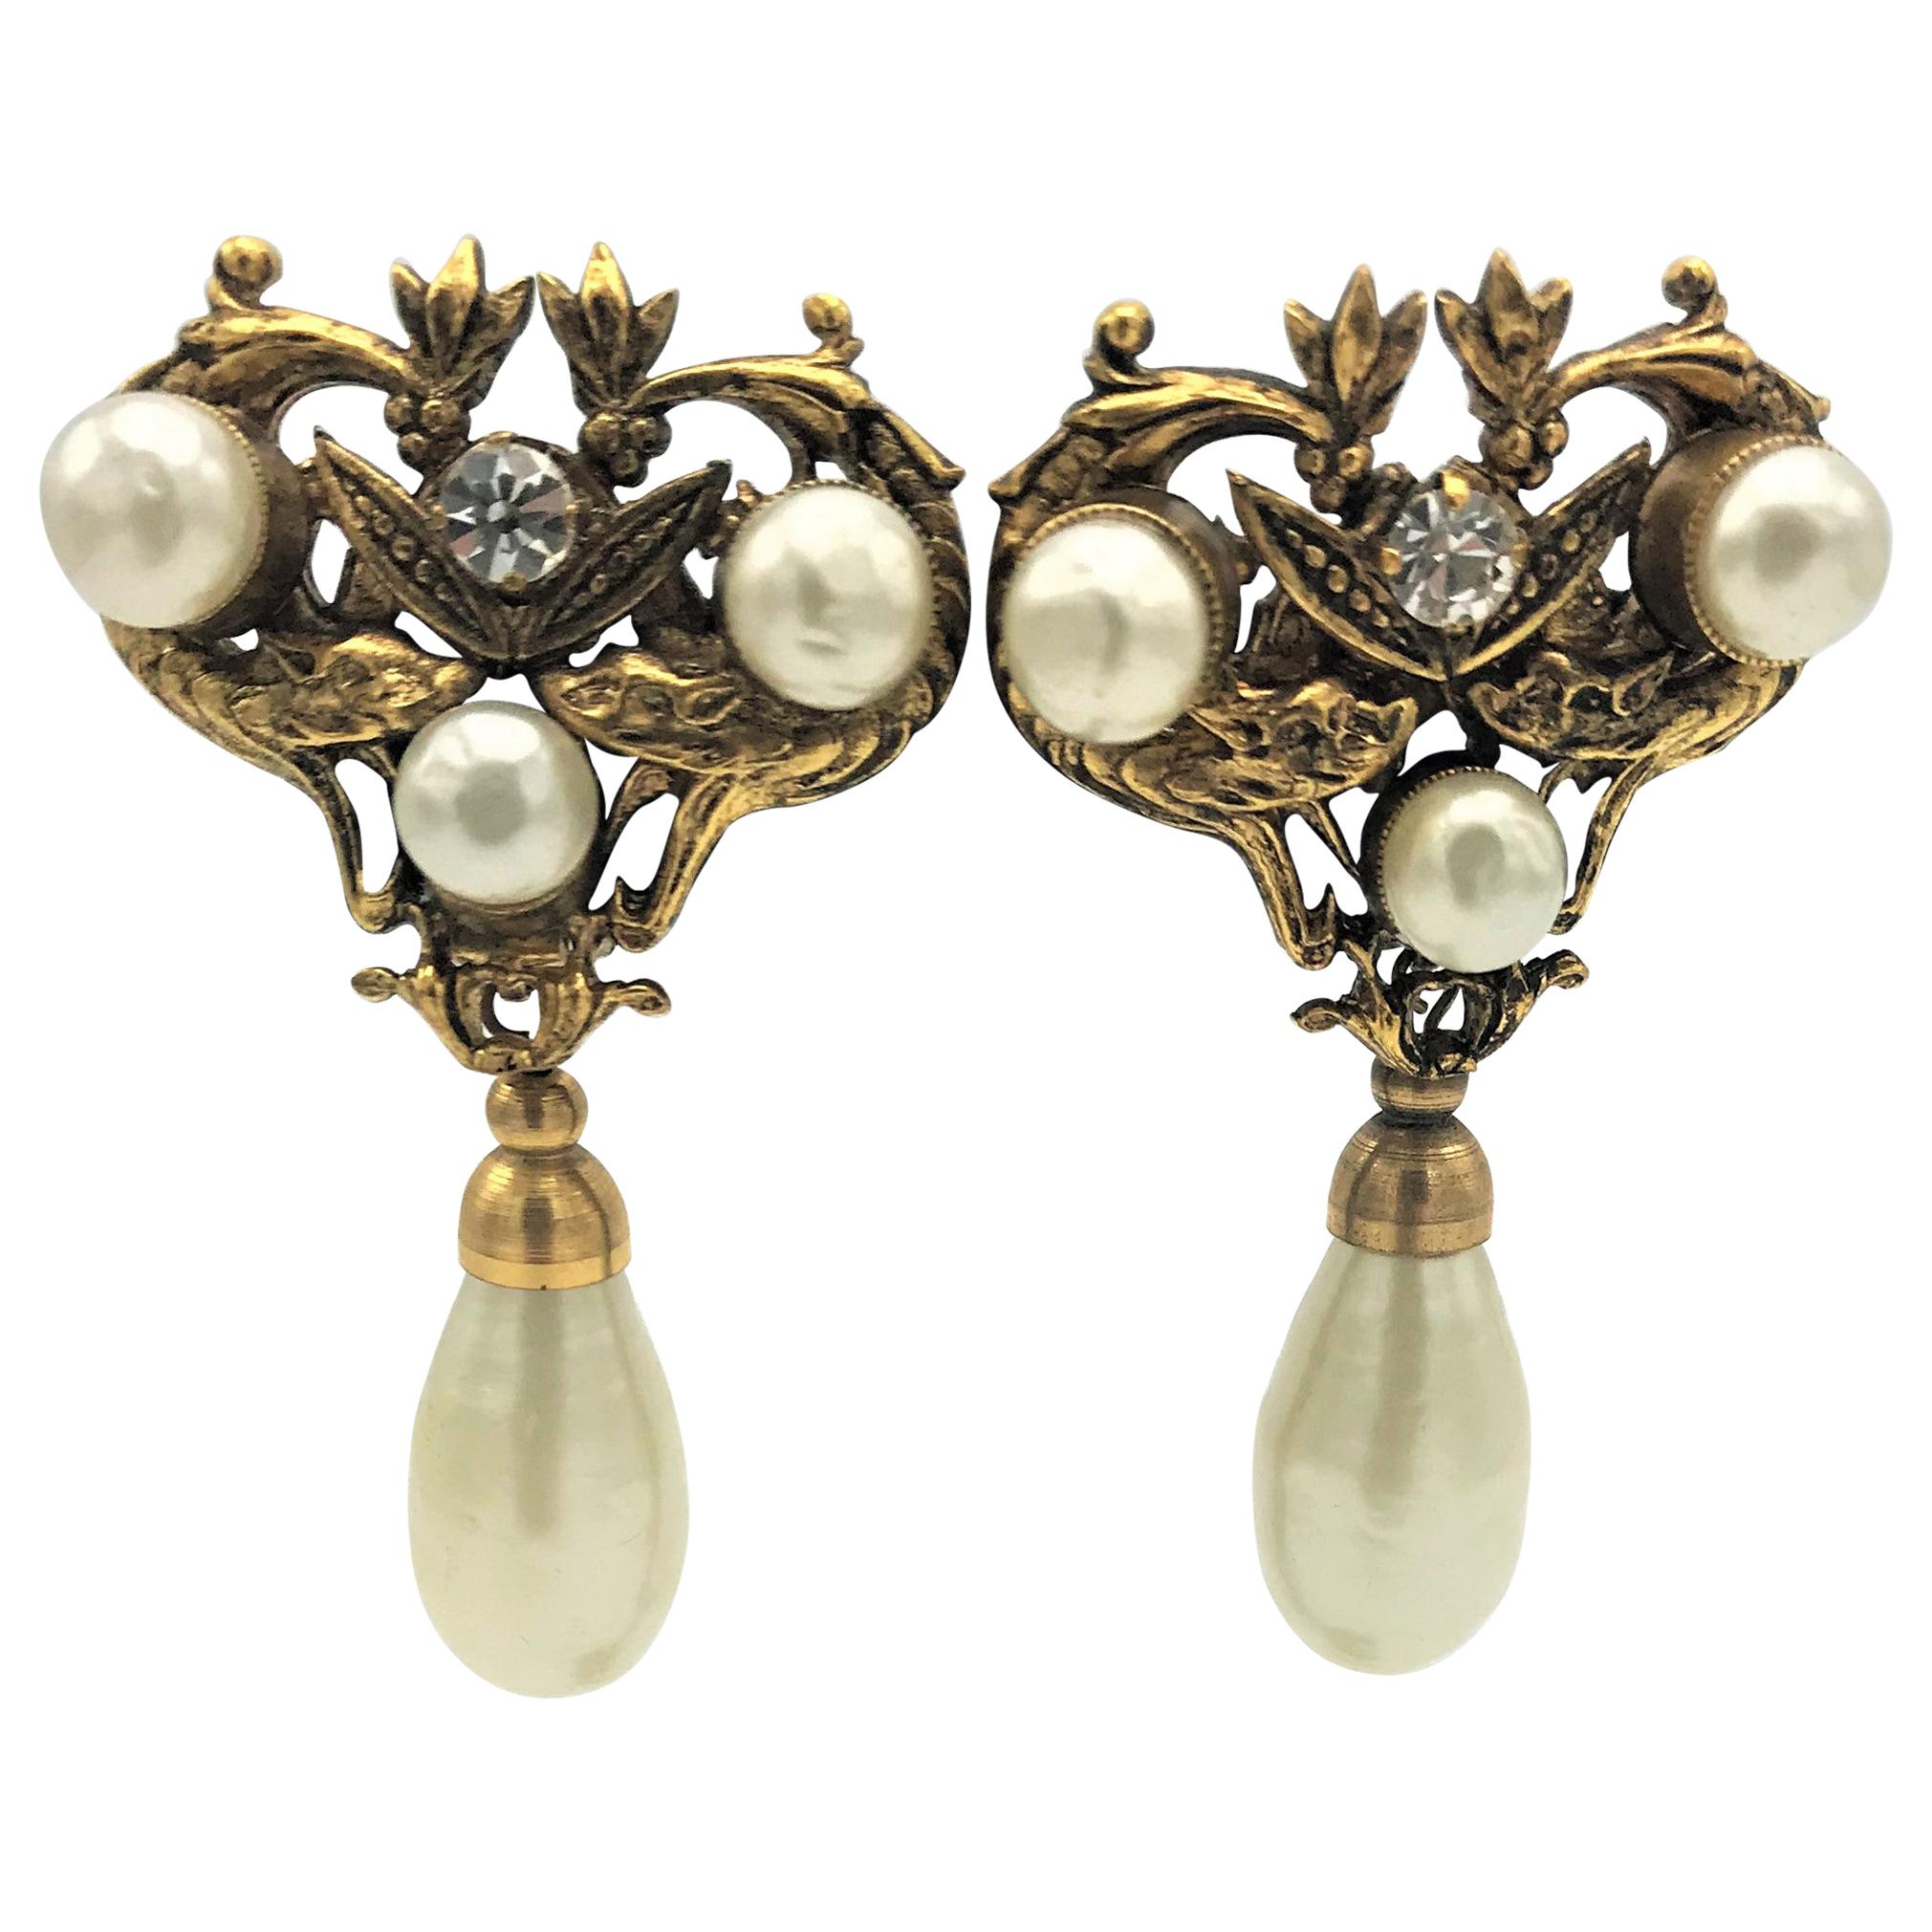 A very unusual Chanel ear clip. On the upper part there are 3 faux pearls entwined by 2 snakes, in the middle a rhinestone with 2 leaves, typical for this work from the 1983 years. Attached a beautiful, large drop-shaped faux